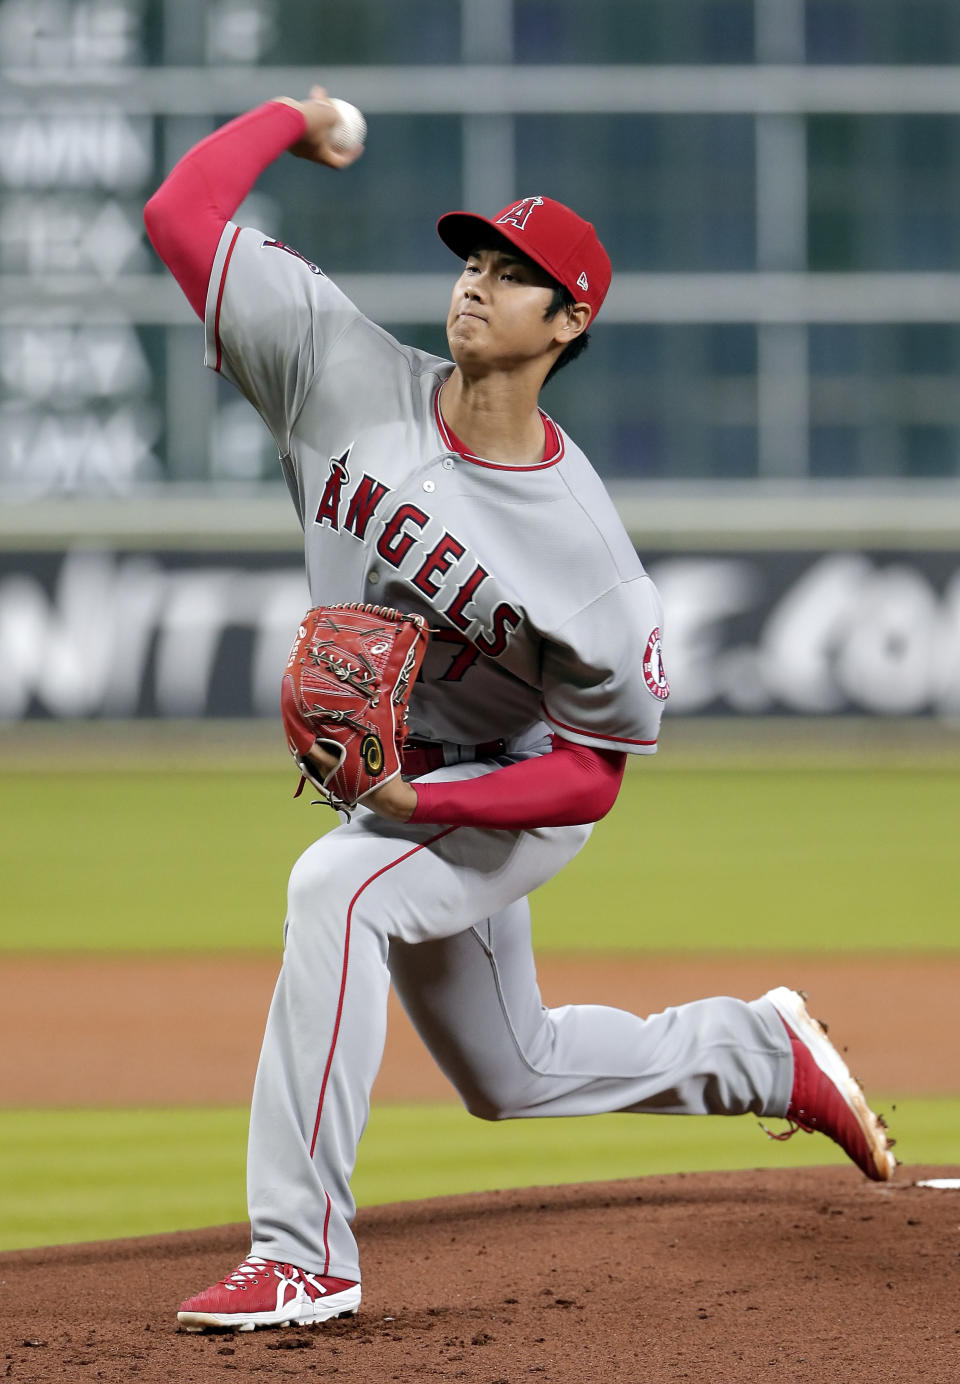 Los Angeles Angels starting pitcher Shohei Ohtani (17) throws against the Houston Astros during the first inning of a baseball game Sunday, Sep. 2, 2018, in Houston. (AP Photo/Michael Wyke)